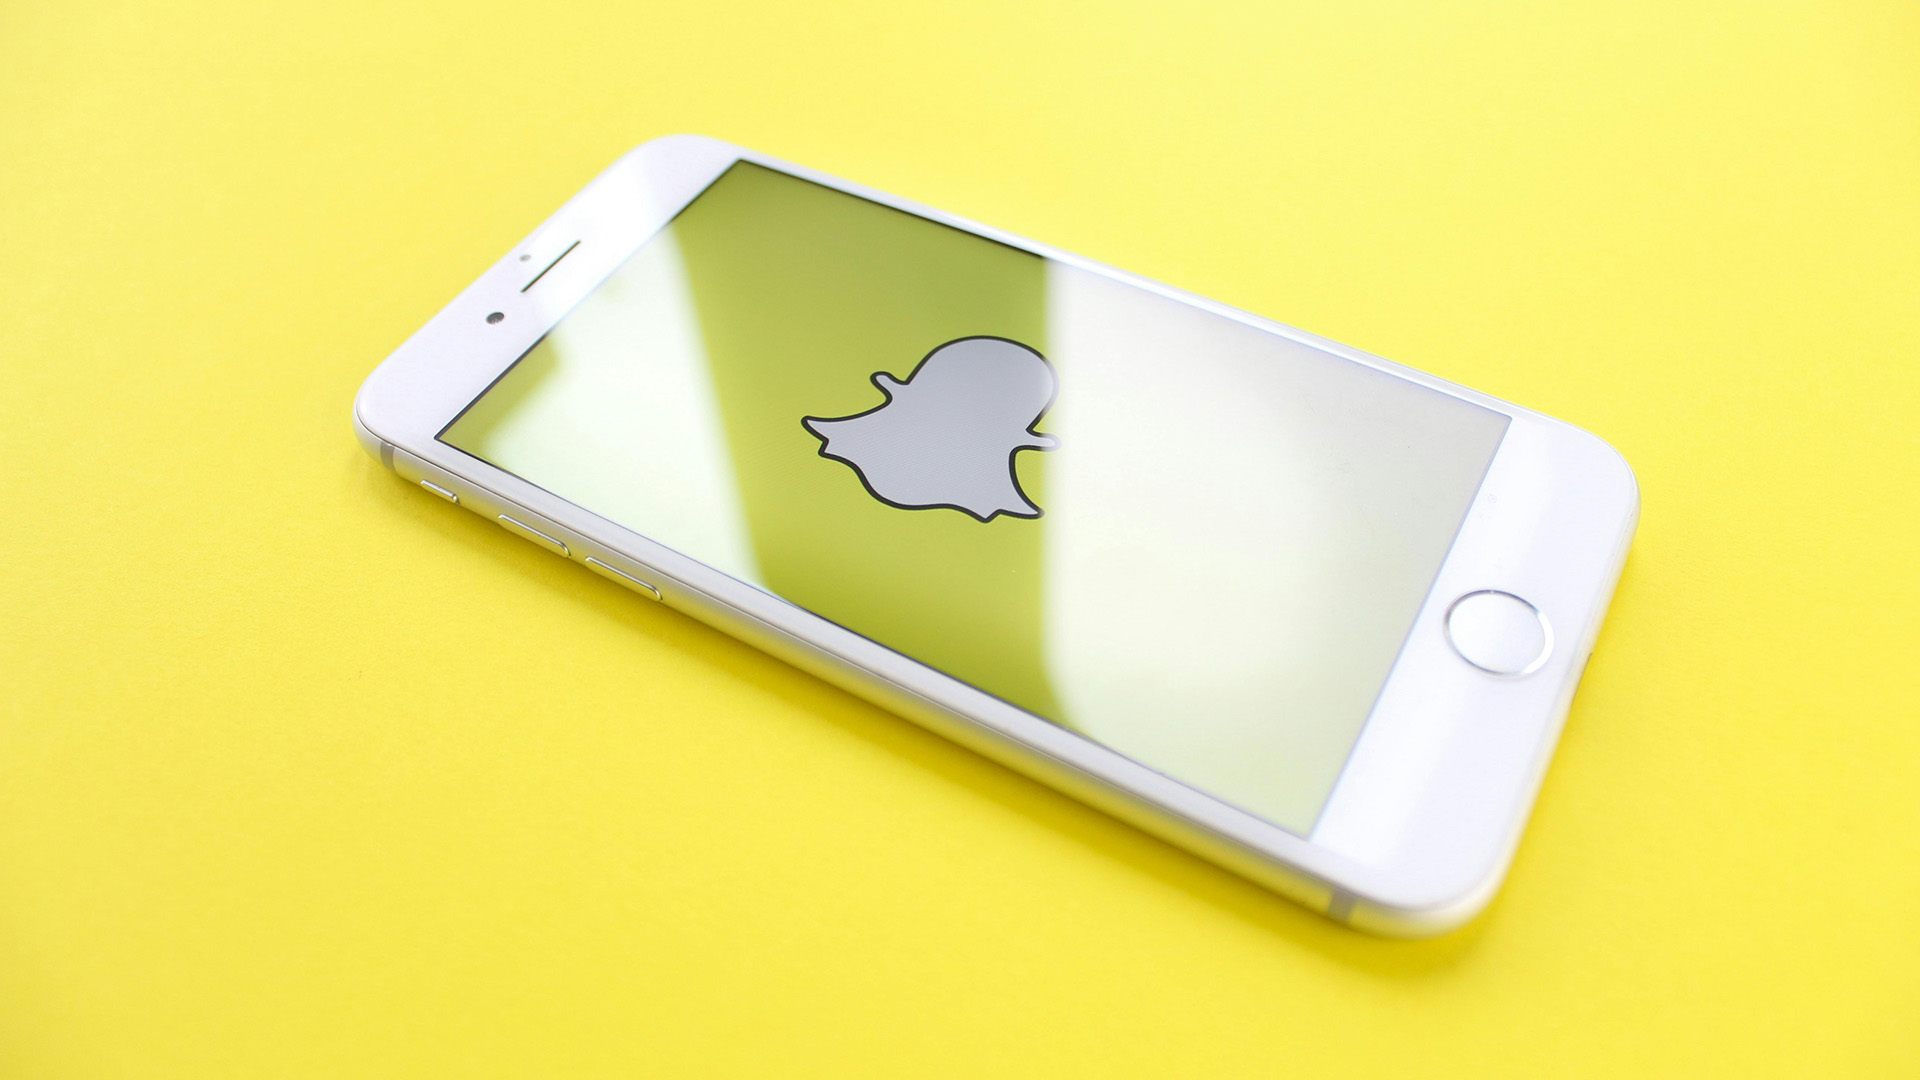 Snap launches an industry first advertising product